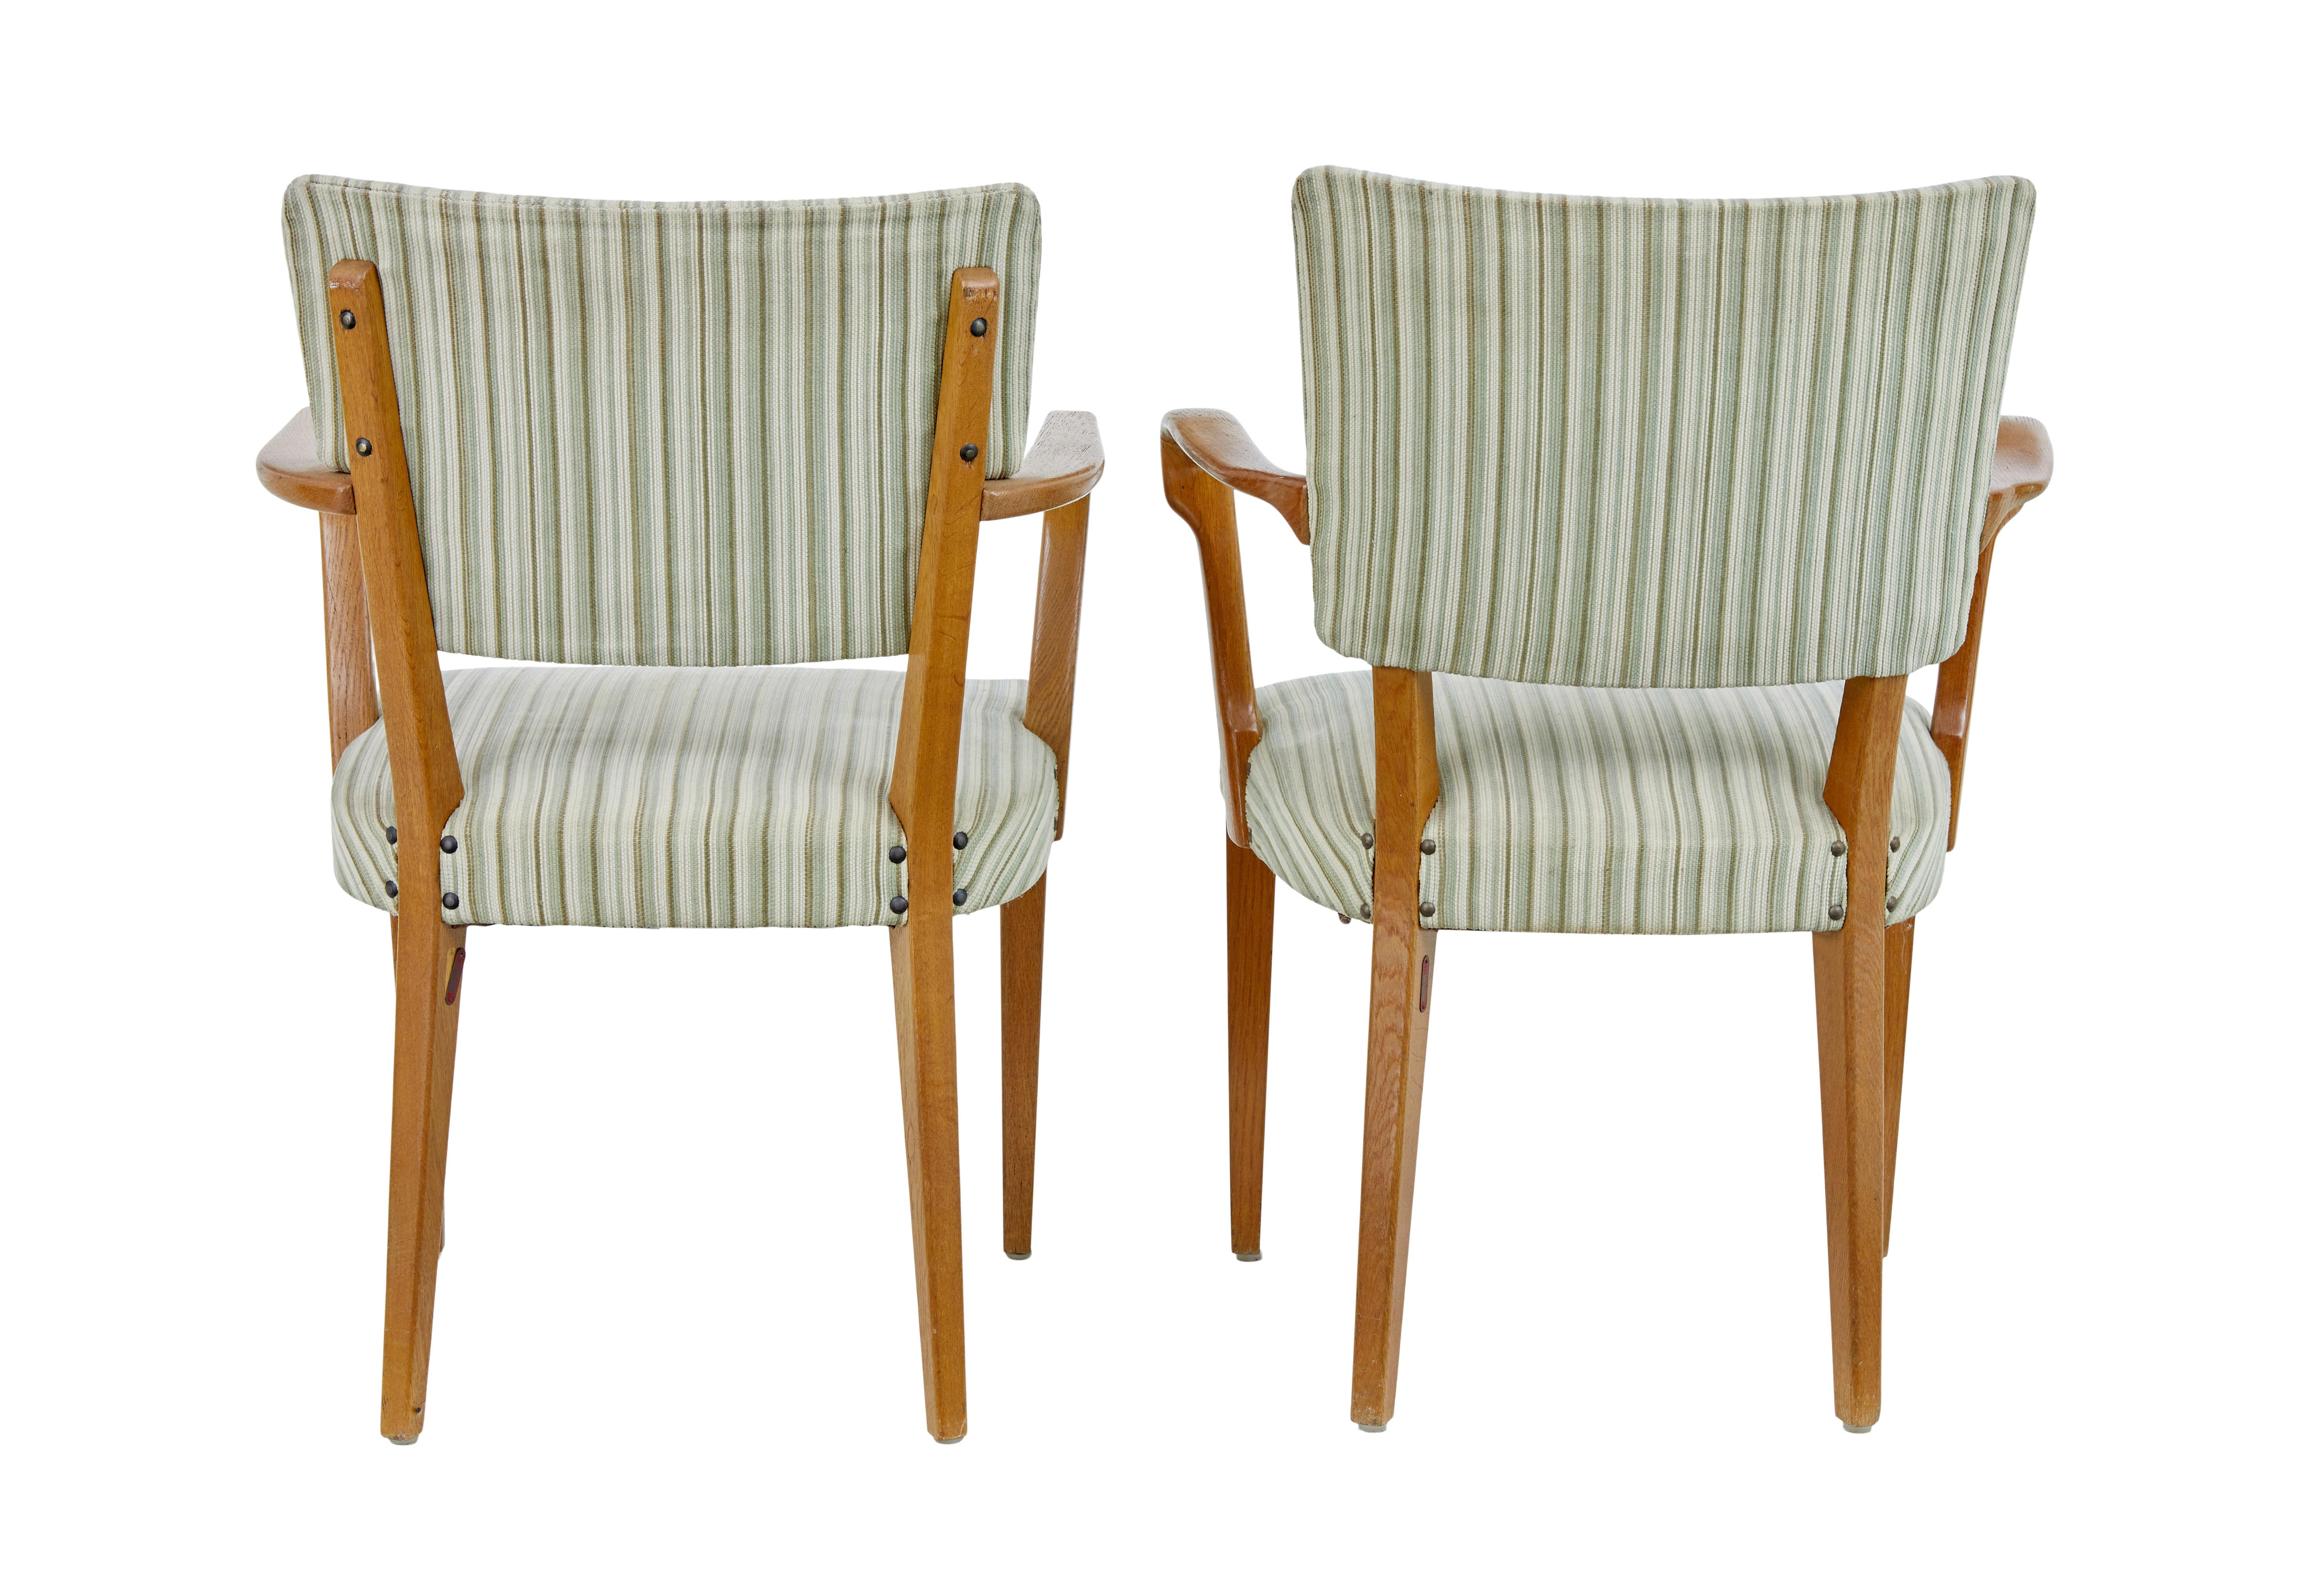 Harlequin set of 6 Swedish 1960’s armchairs by atvidabergs In Good Condition For Sale In Debenham, Suffolk